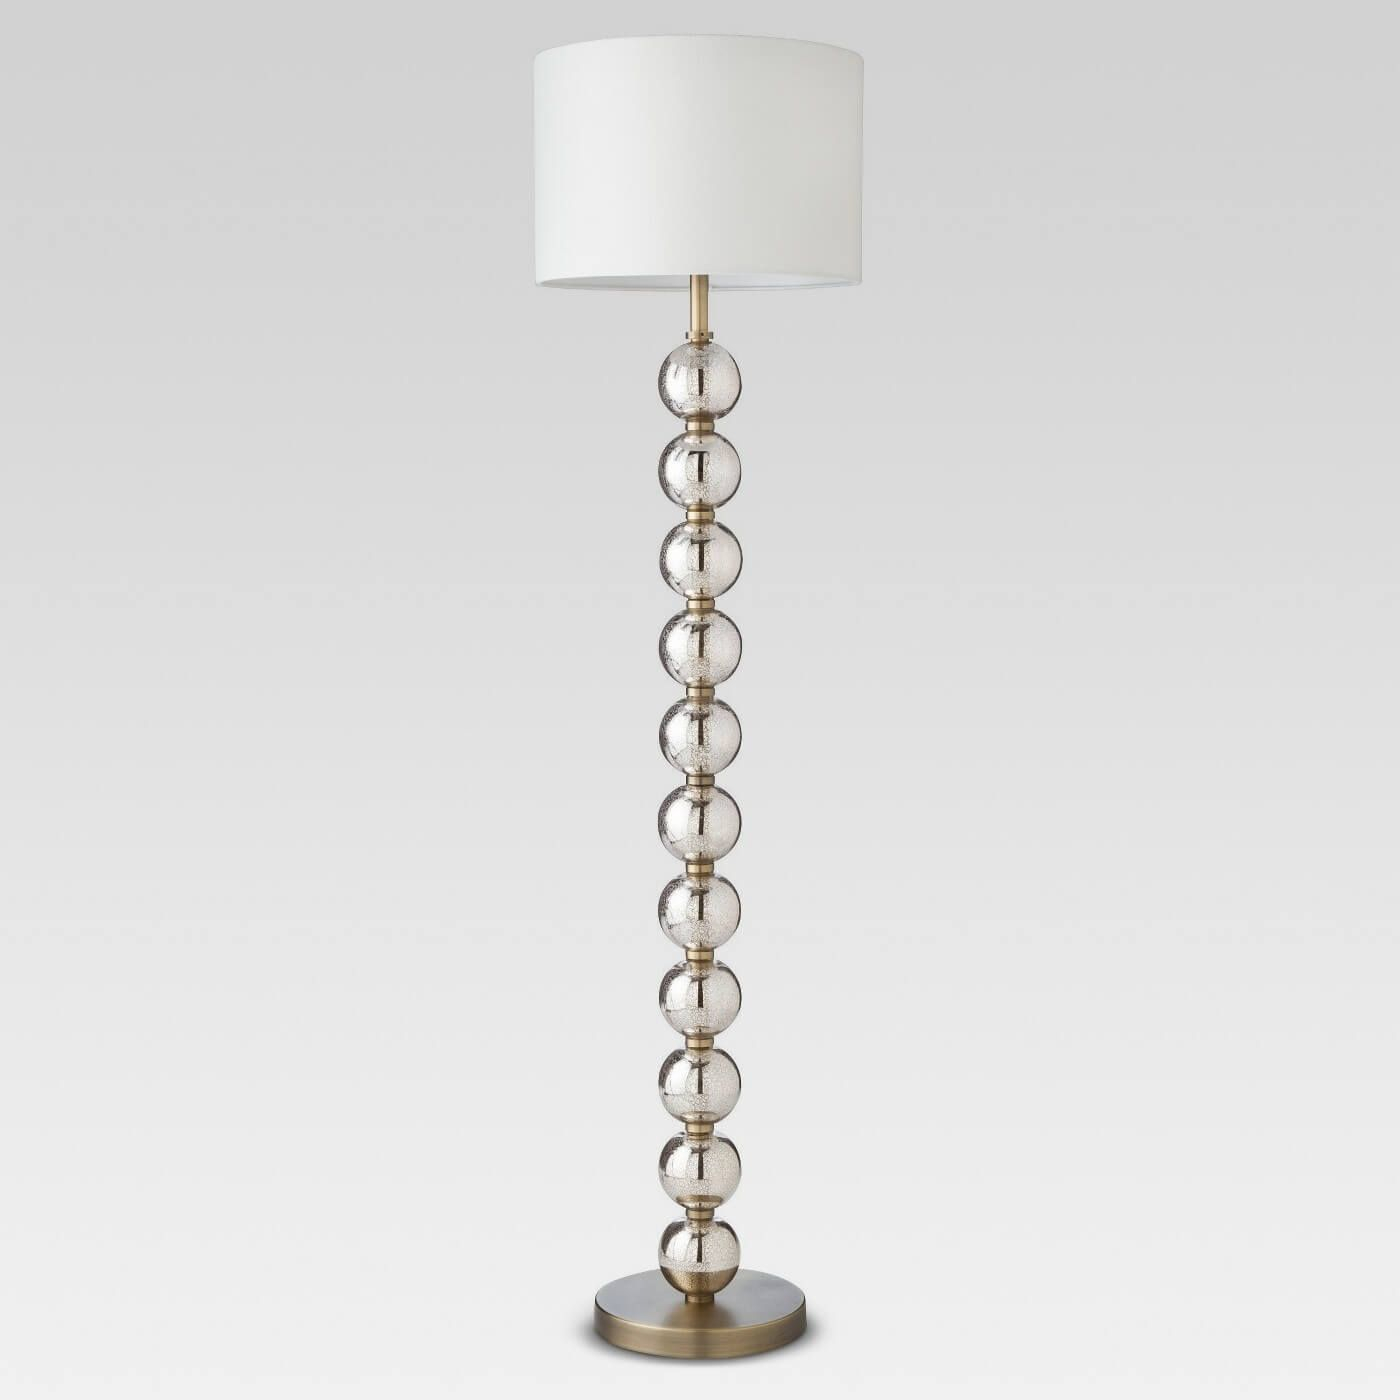 20 Target Floor Lamps That Are Chic Modern Statement with size 1400 X 1400